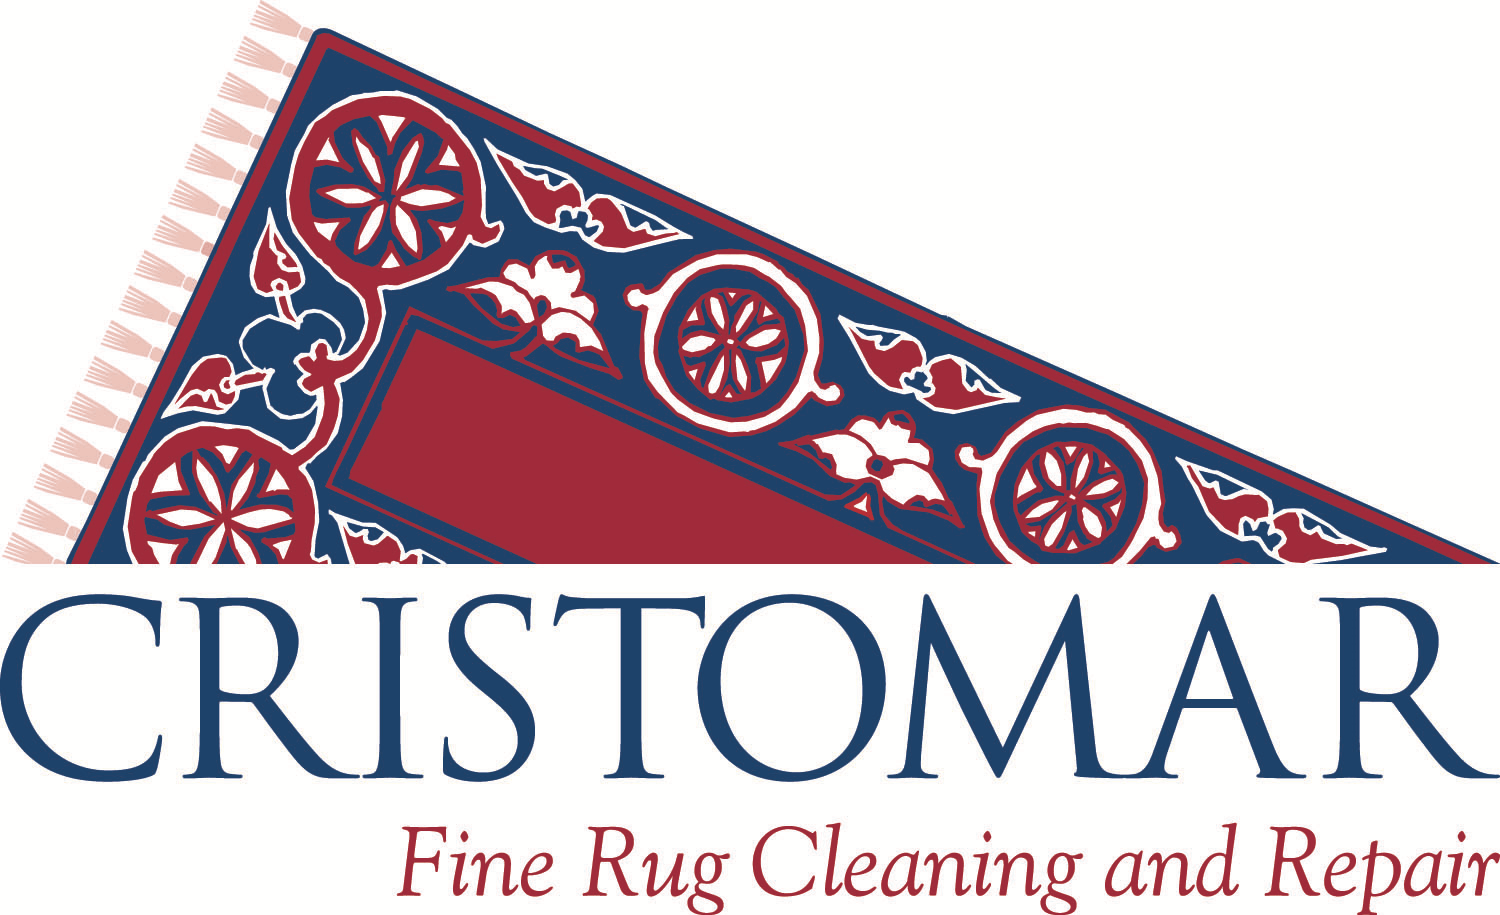 Cristomar Fine Rug Cleaning and Repair